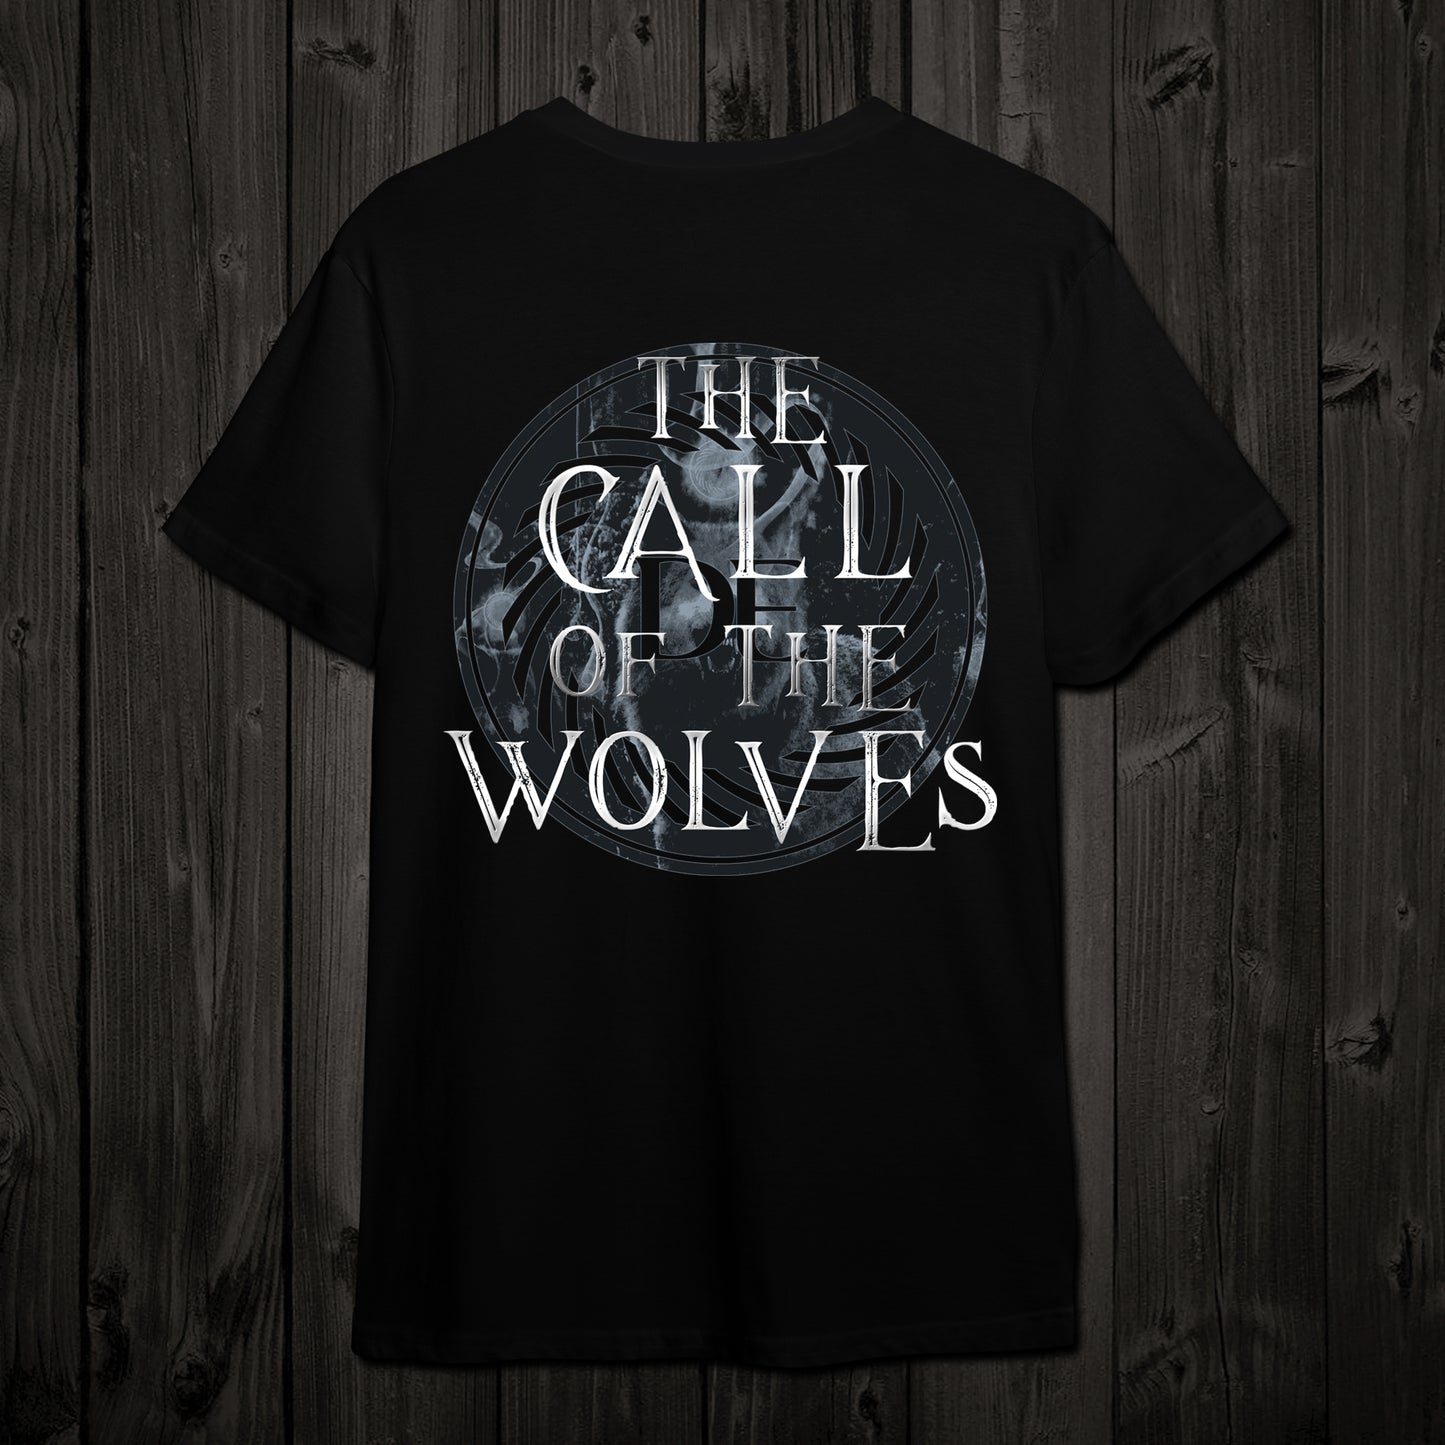 The Call of the Wolves t-shirt